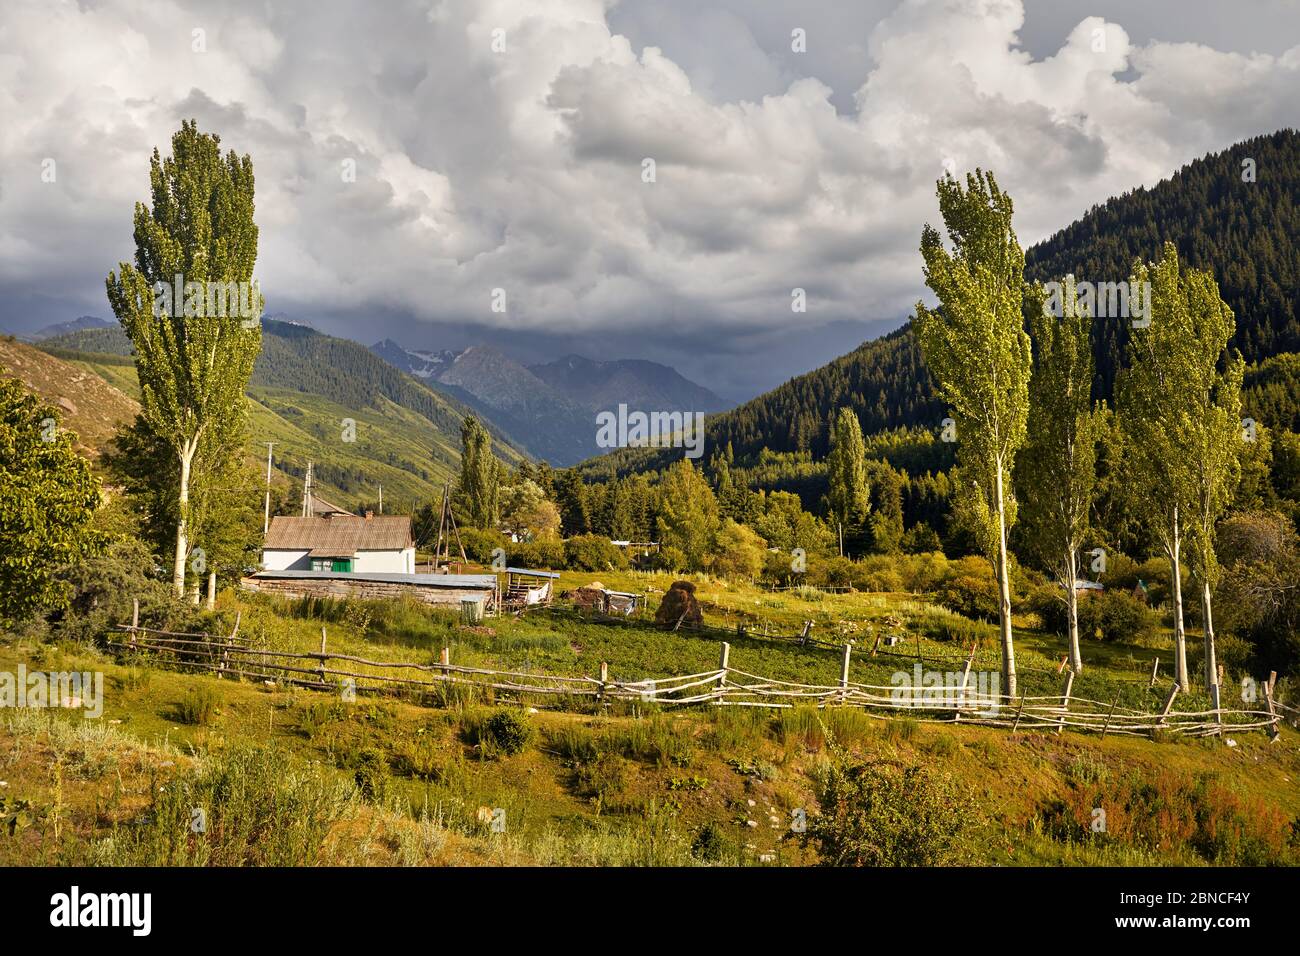 Old house white in the small village in Karakol gorge mountains in Kyrgyzstan Stock Photo